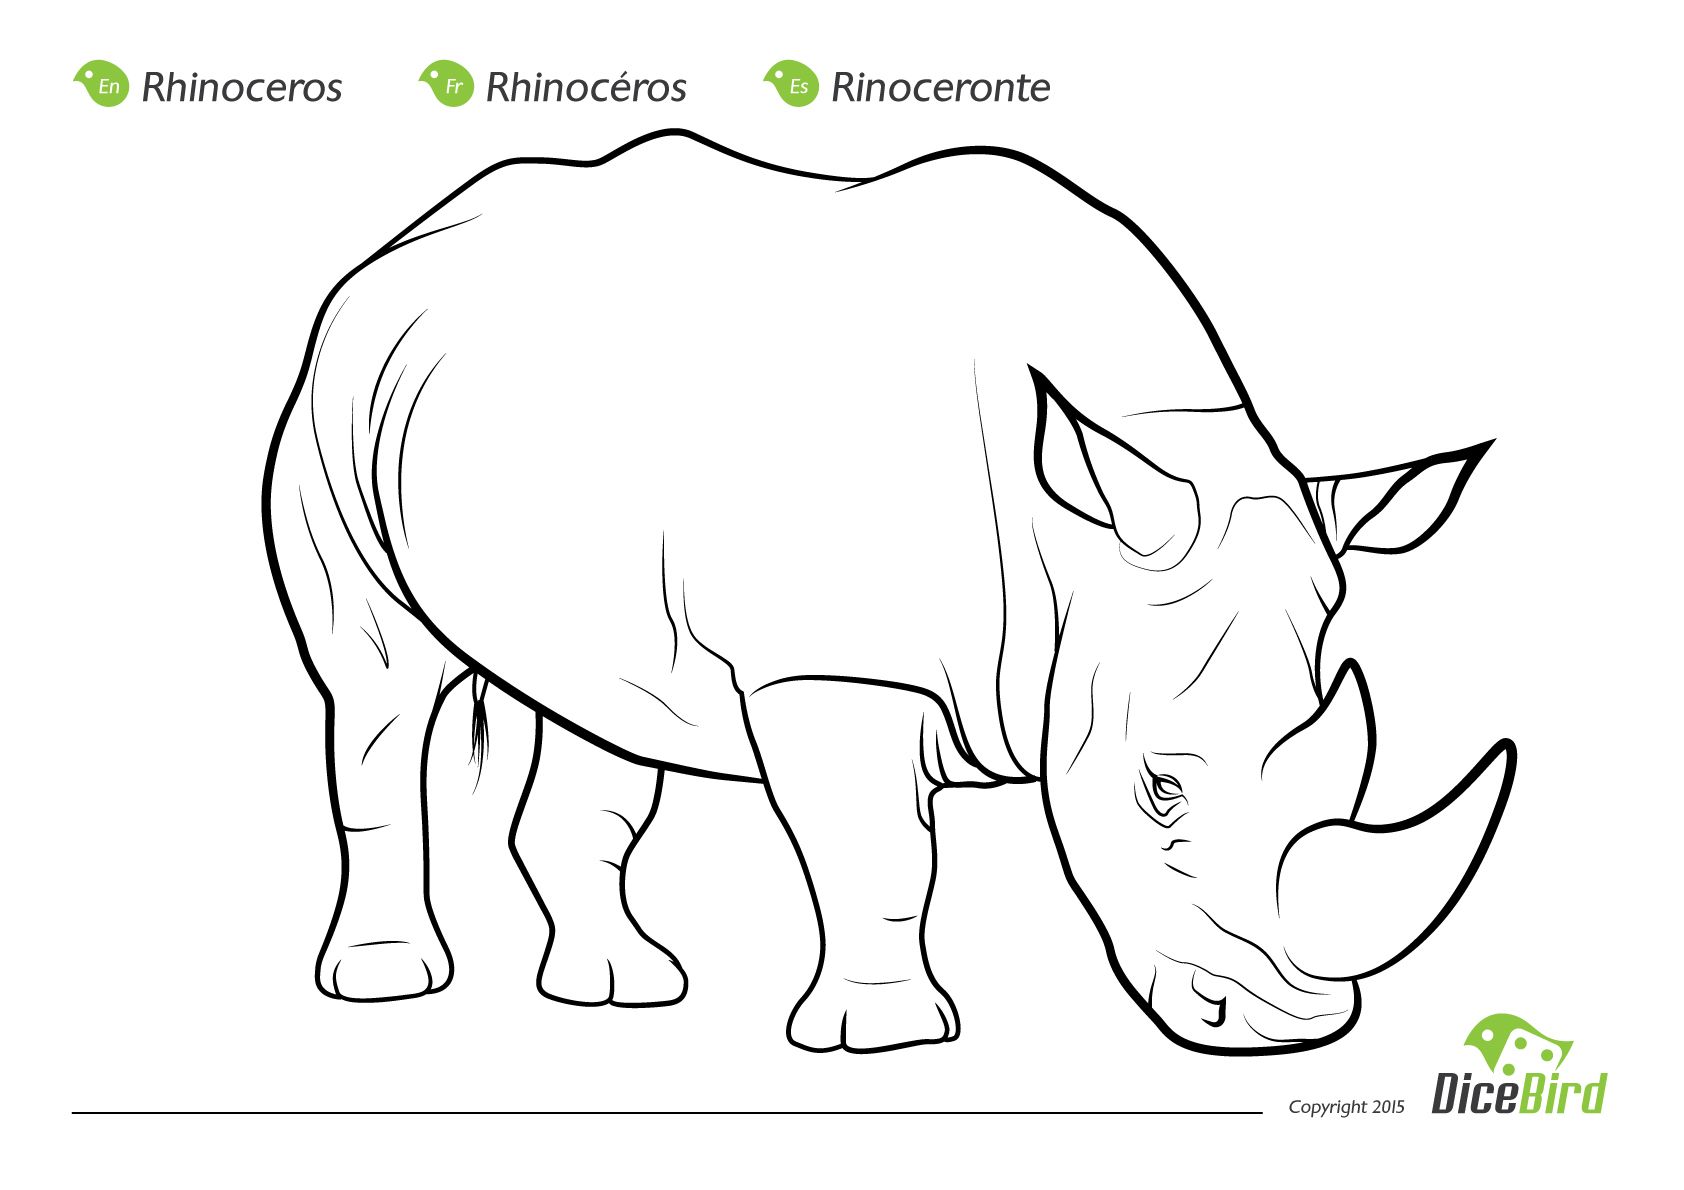 The Rhinoceros coloring sheet for kids